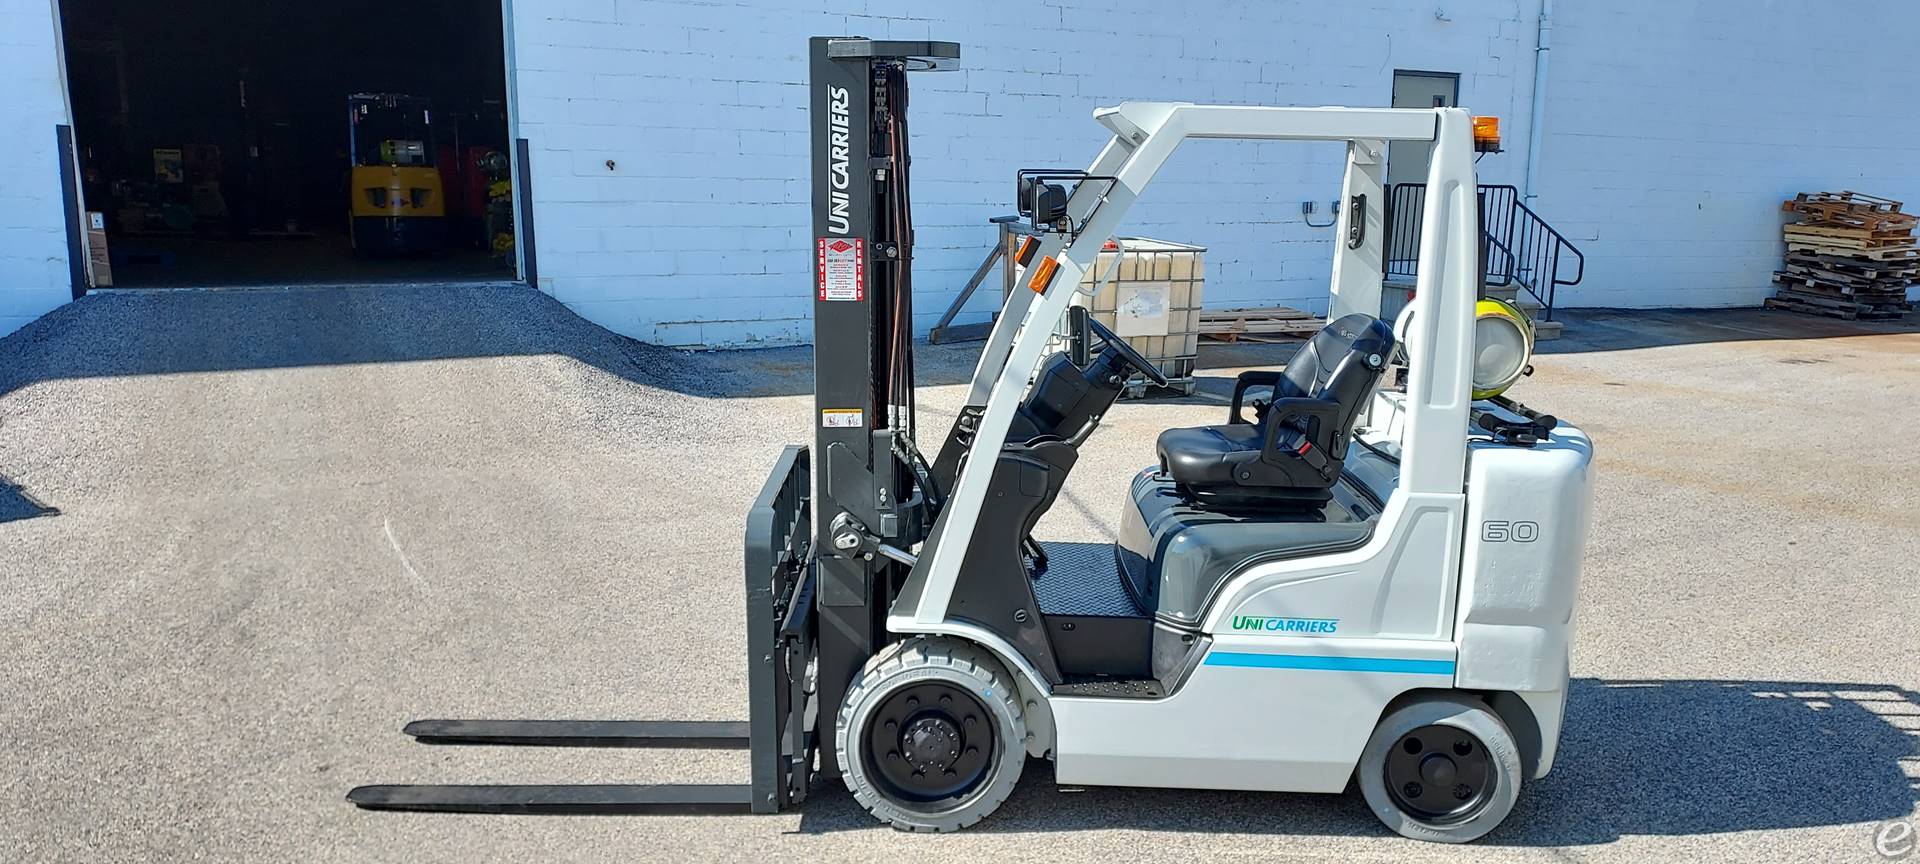 2015 Unicarriers MCUG1F2F30LV- CF60LP Cushion Tire Forklift - 123Forklift